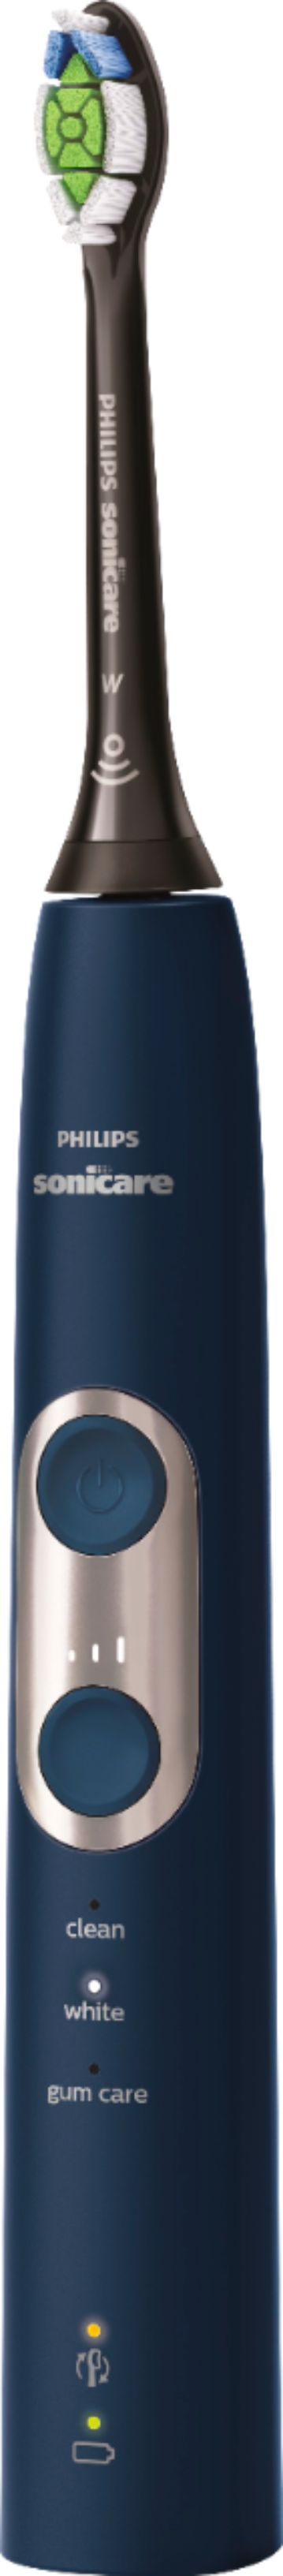 Angle View: Philips Sonicare - ProtectiveClean 6100 Rechargeable Toothbrush - Navy Blue